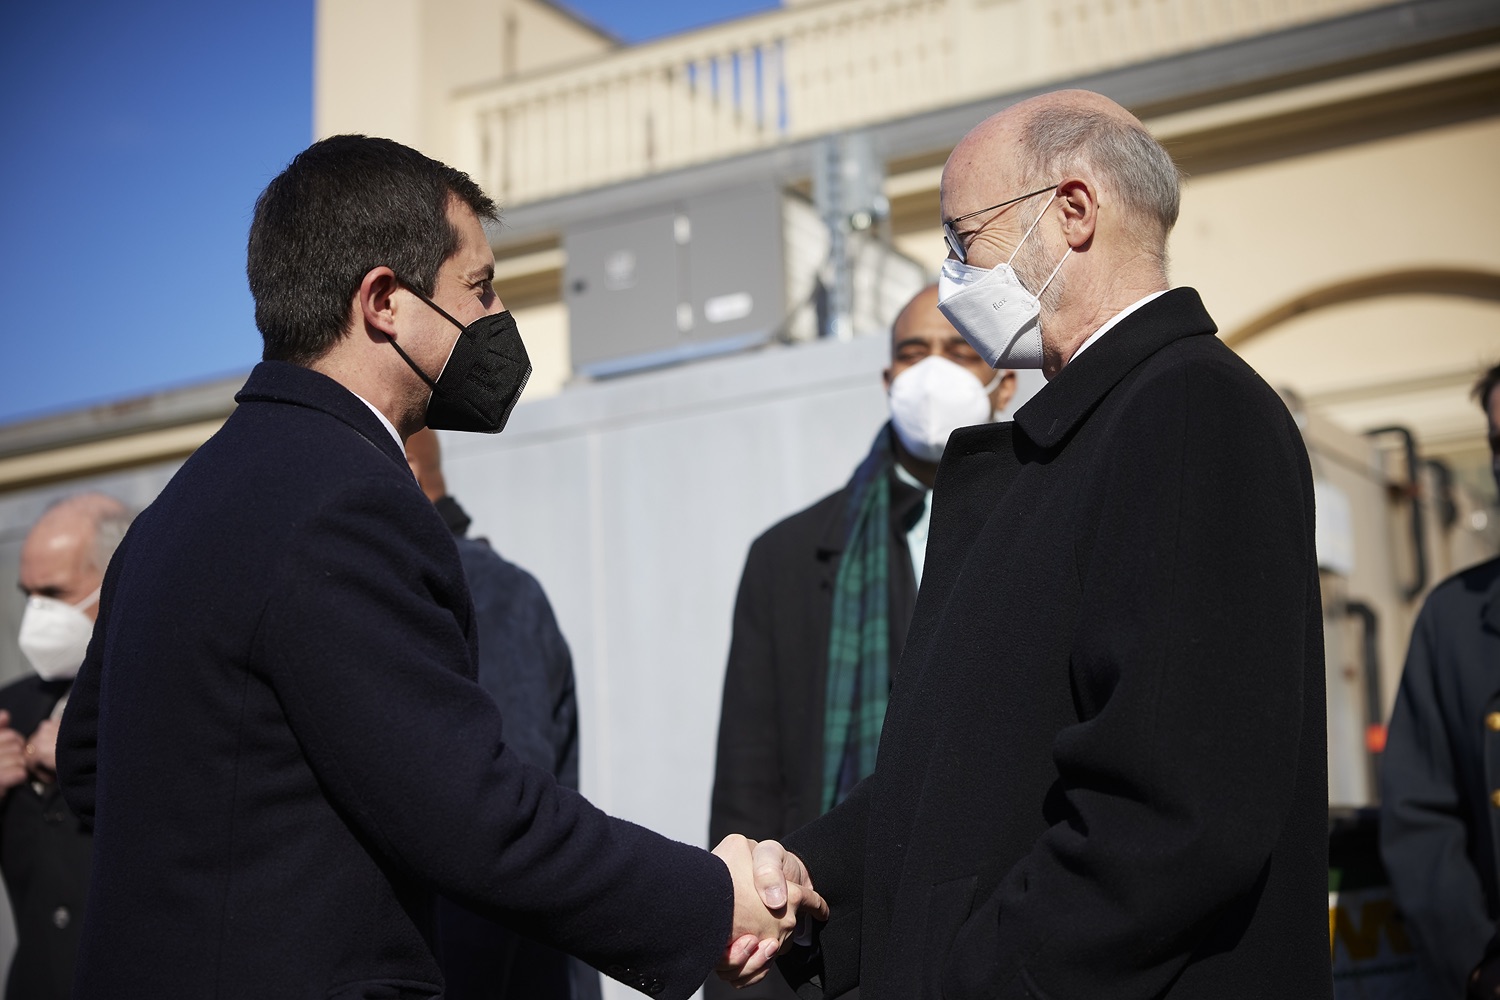 Pennsylvania Governor Tom Wolf greeting Pete Buttigieg, U.S. Secretary of Transportation.  Governor Tom Wolf stood alongside U.S. Transportation Secretary Pete Buttigieg to launch the largest bridge formula program in American history, made possible by the passage of the Bipartisan Infrastructure Law. Pennsylvania is set to receive $1.6 billion to fix more than 3,000 bridges across the commonwealth.  Philadelphia, PA  January 14, 2021<br><a href="https://filesource.amperwave.net/commonwealthofpa/photo/20426_gov_bridgeAnnoucement_dz_007_copy.jpg" target="_blank">⇣ Download Photo</a>